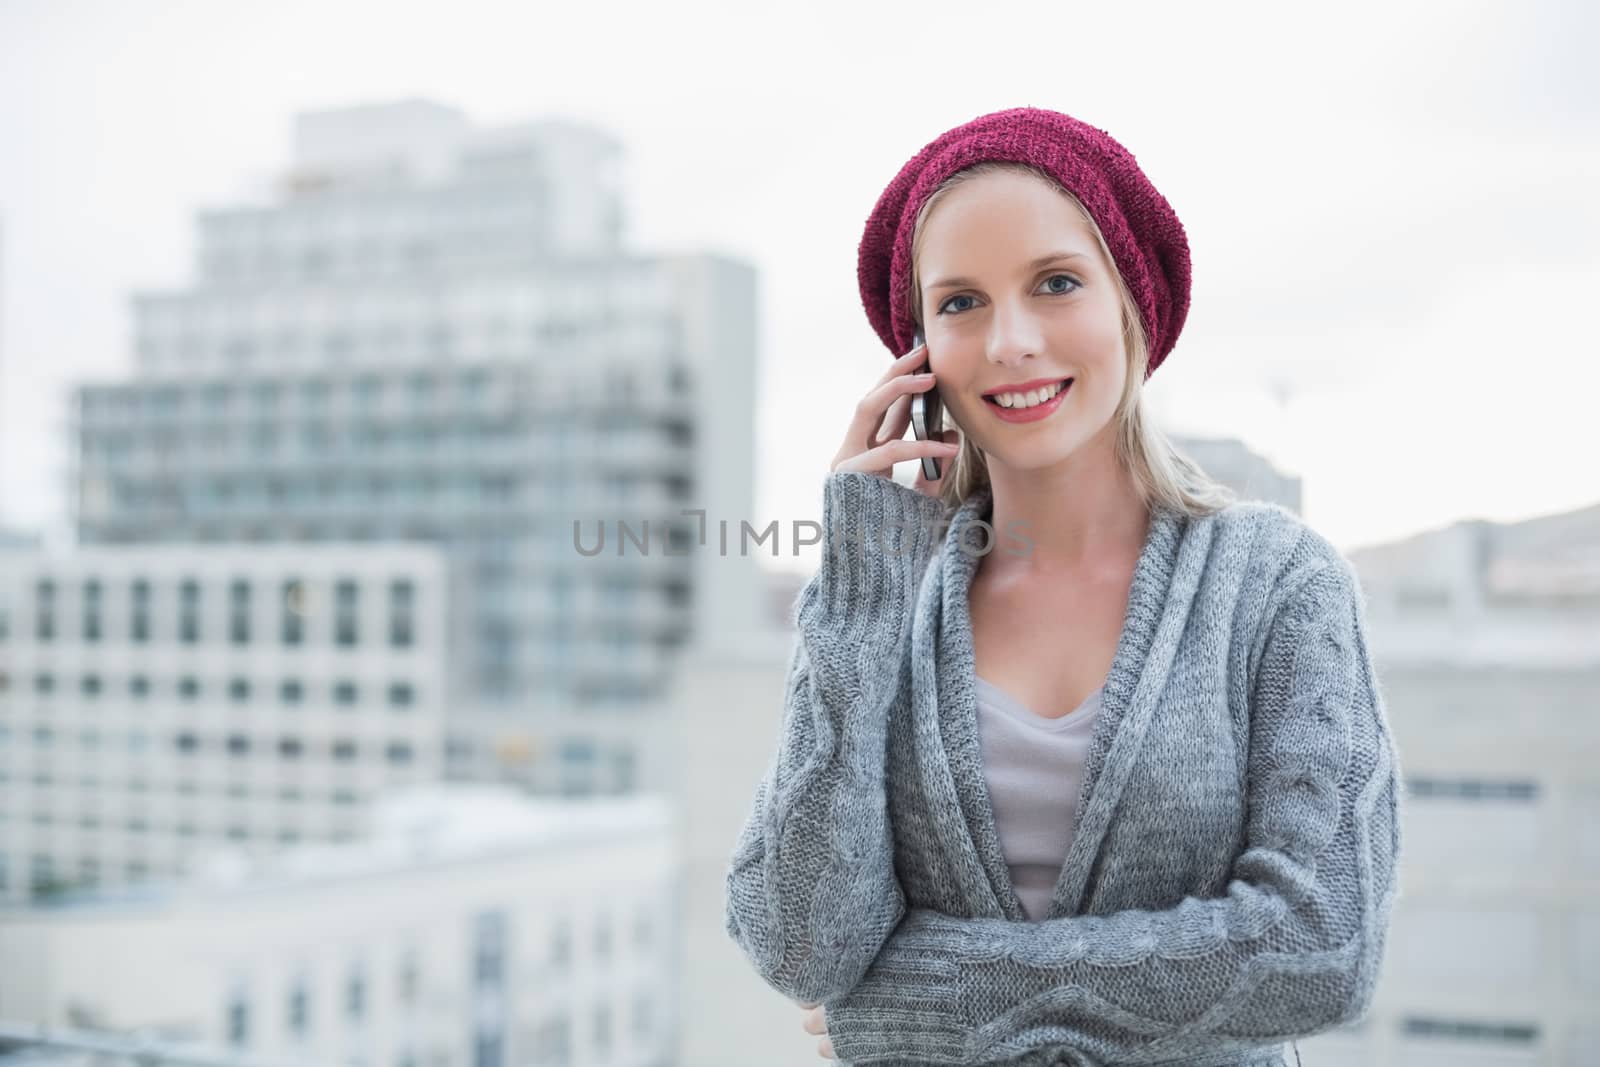 Smiling pretty blonde on the phone outdoors on urban background